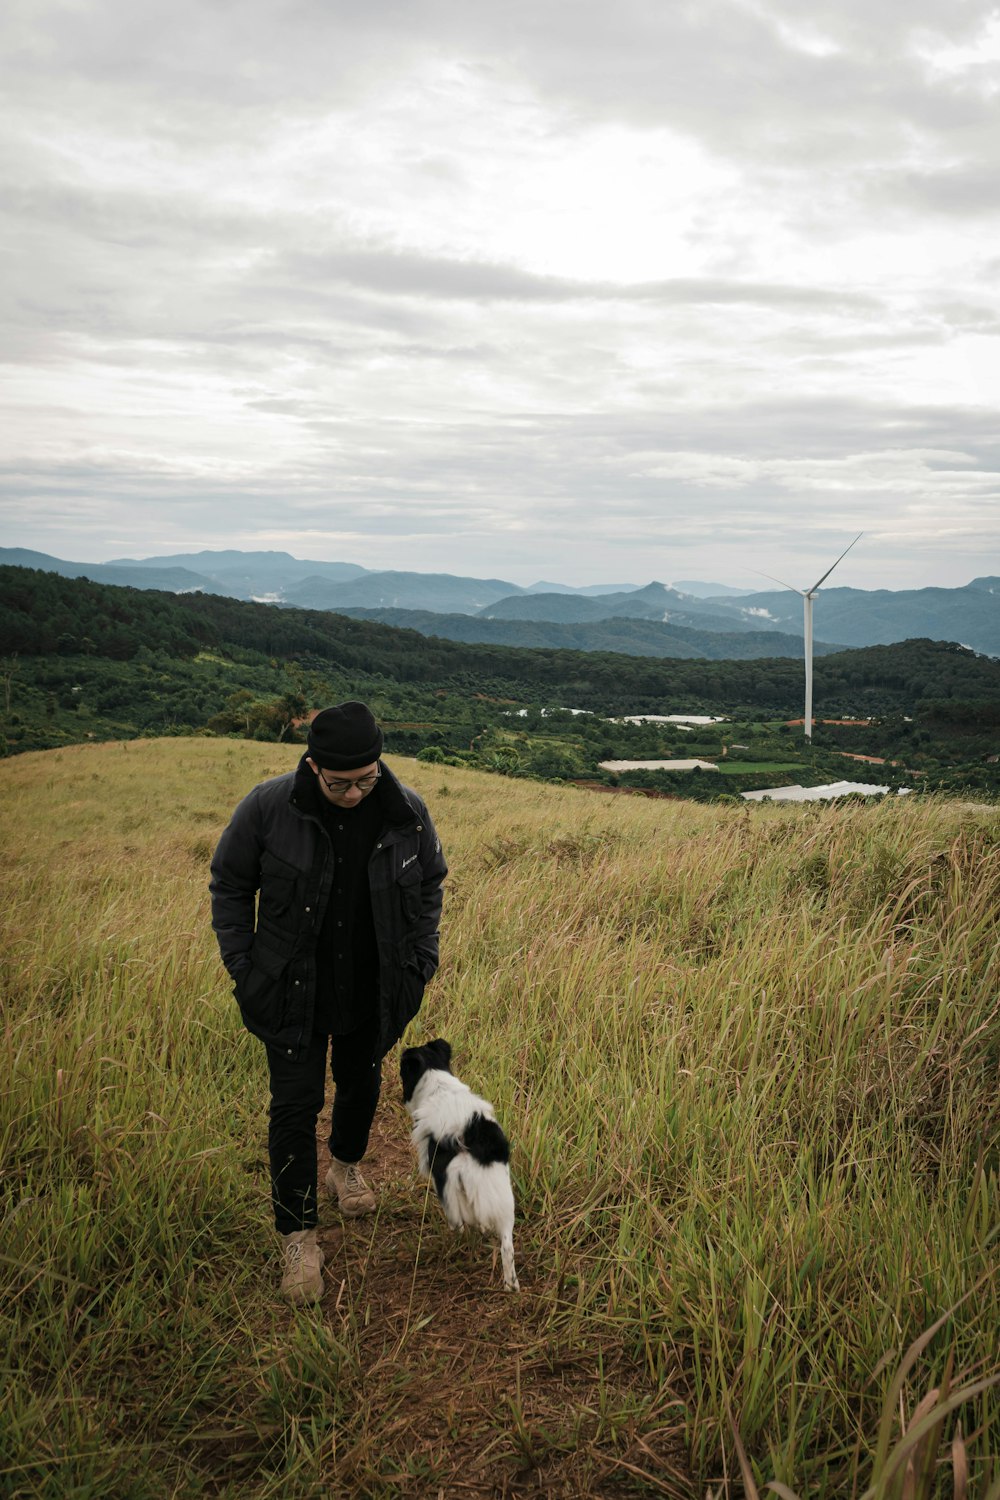 a man and a dog in a grassy field